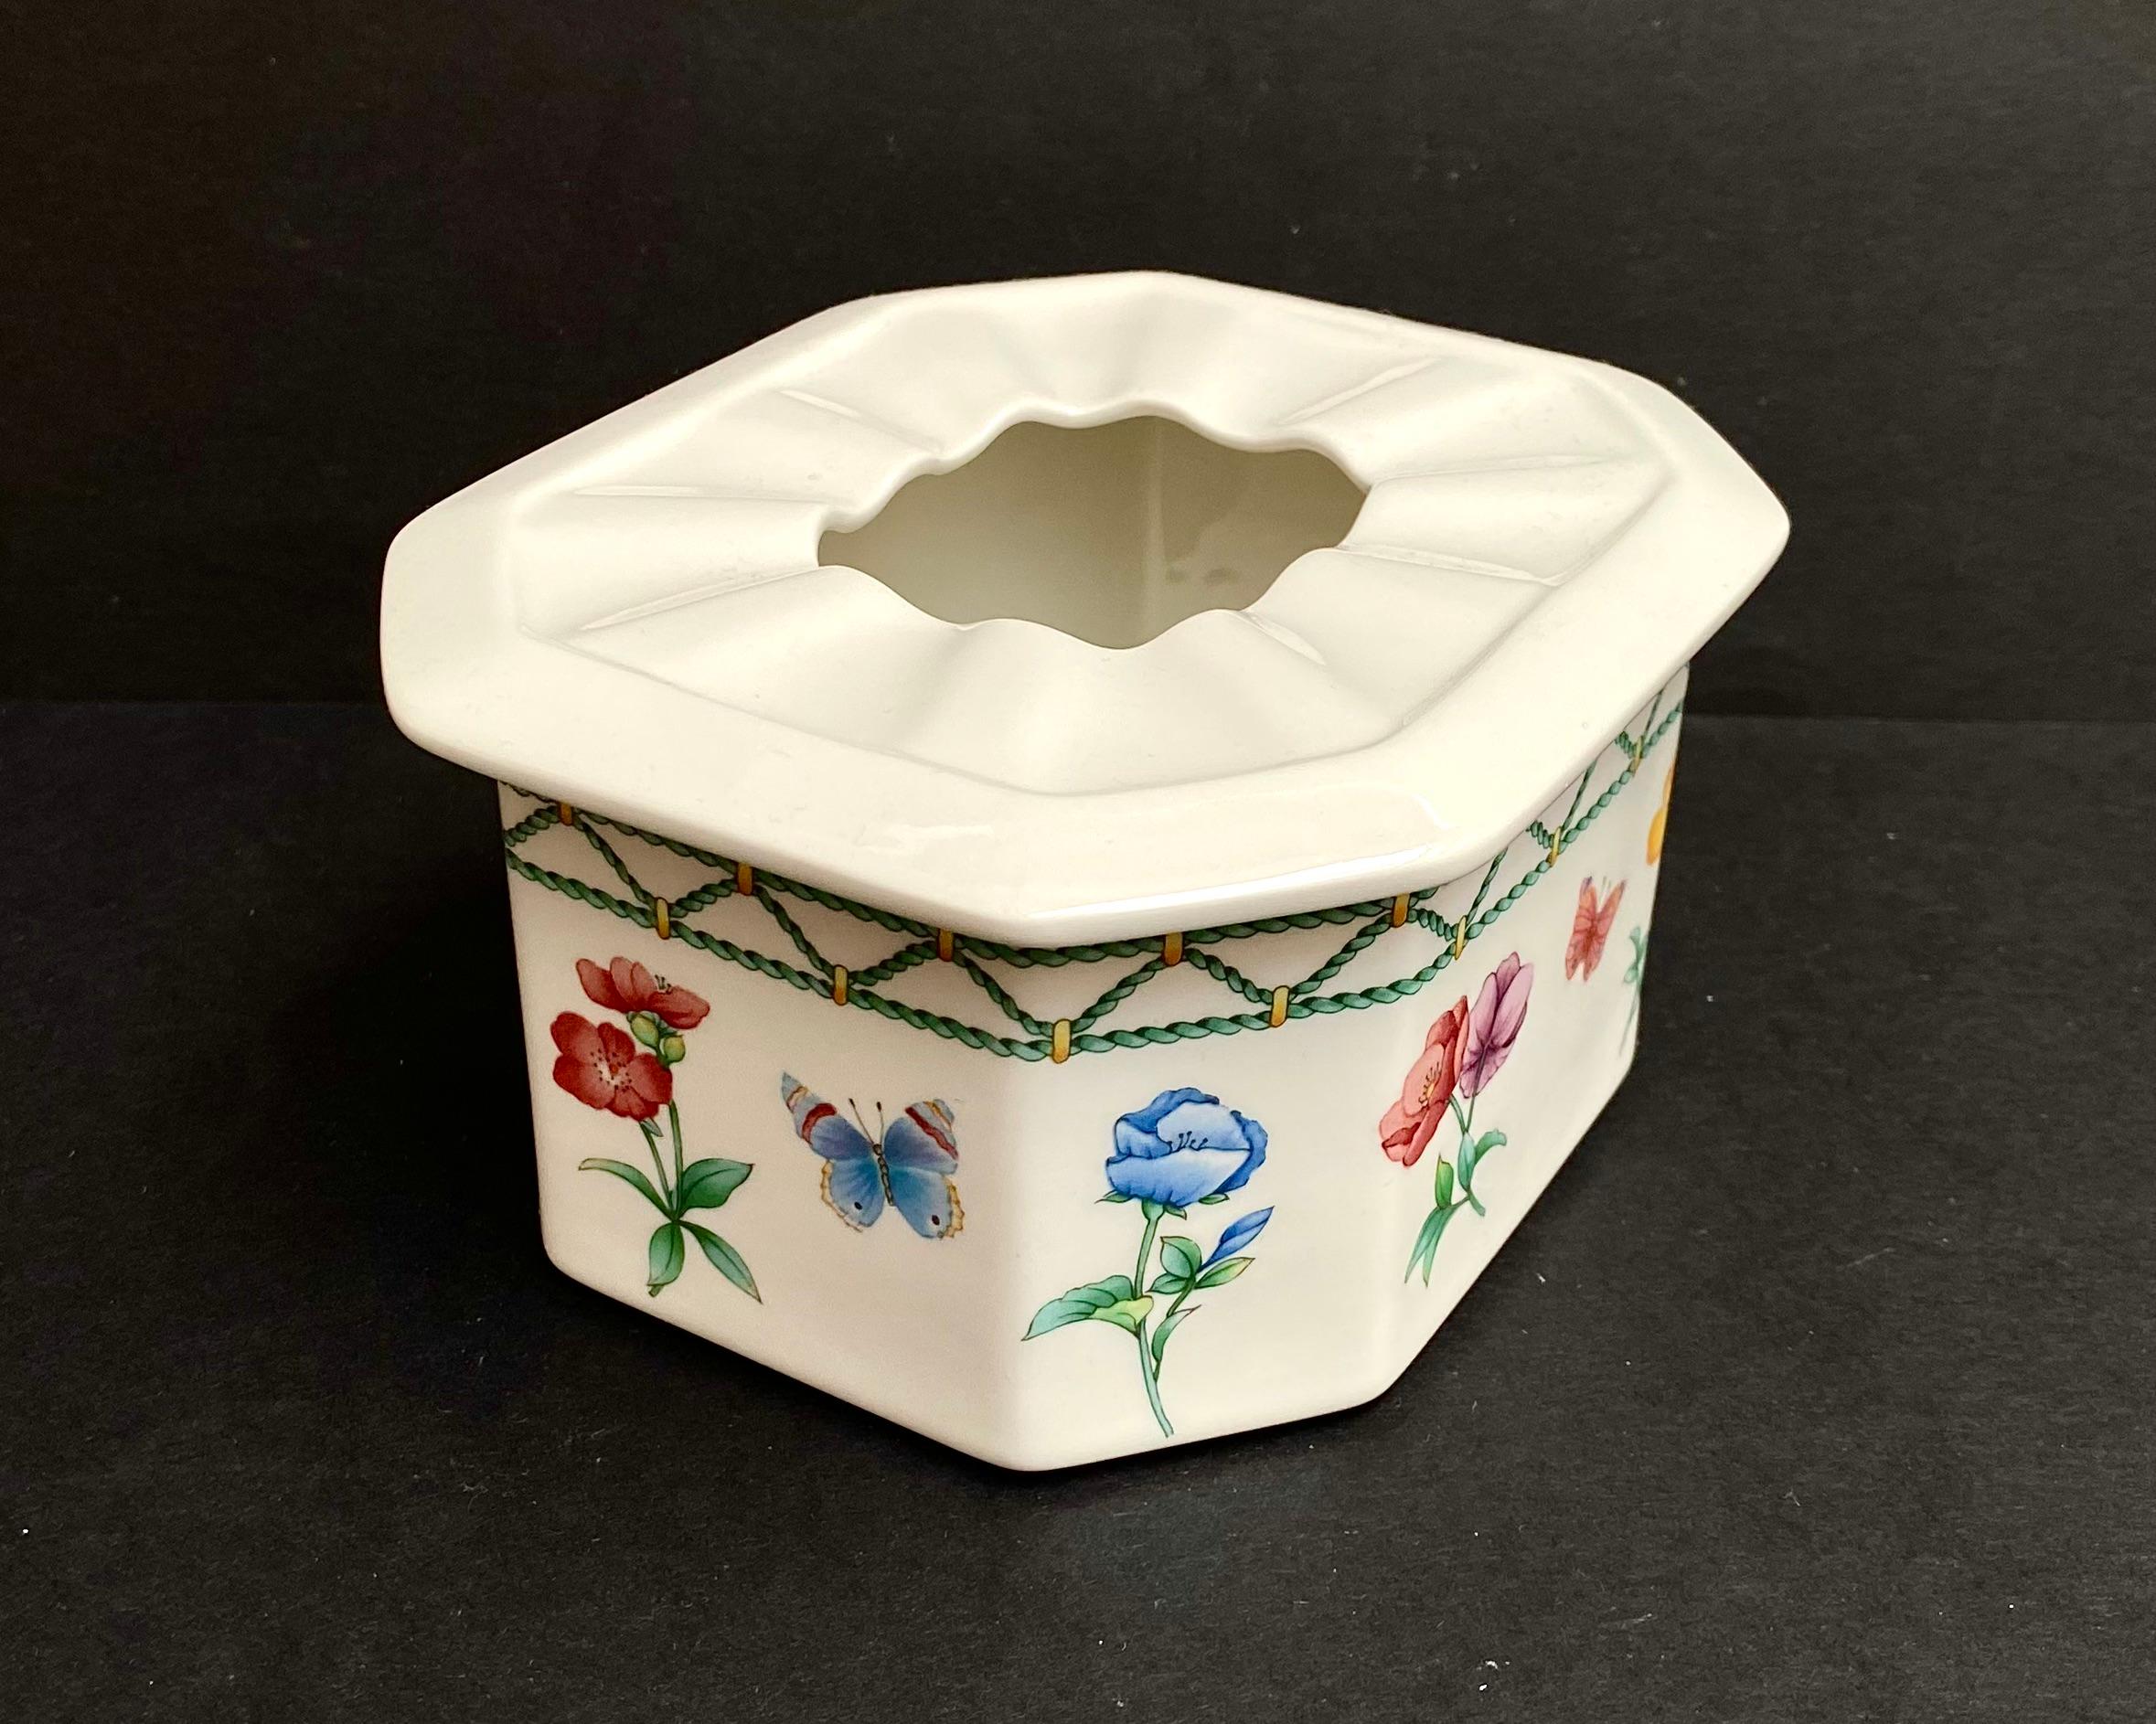 Villeroy & Boch Casa Verde Warmer, Germany, 1992-1995s

The warming stand from Villeroy and Boch Casa Verde series is made of high-quality porcelain with a glazed coating.

White color decorated with a lovely flower and butterfly motif will look